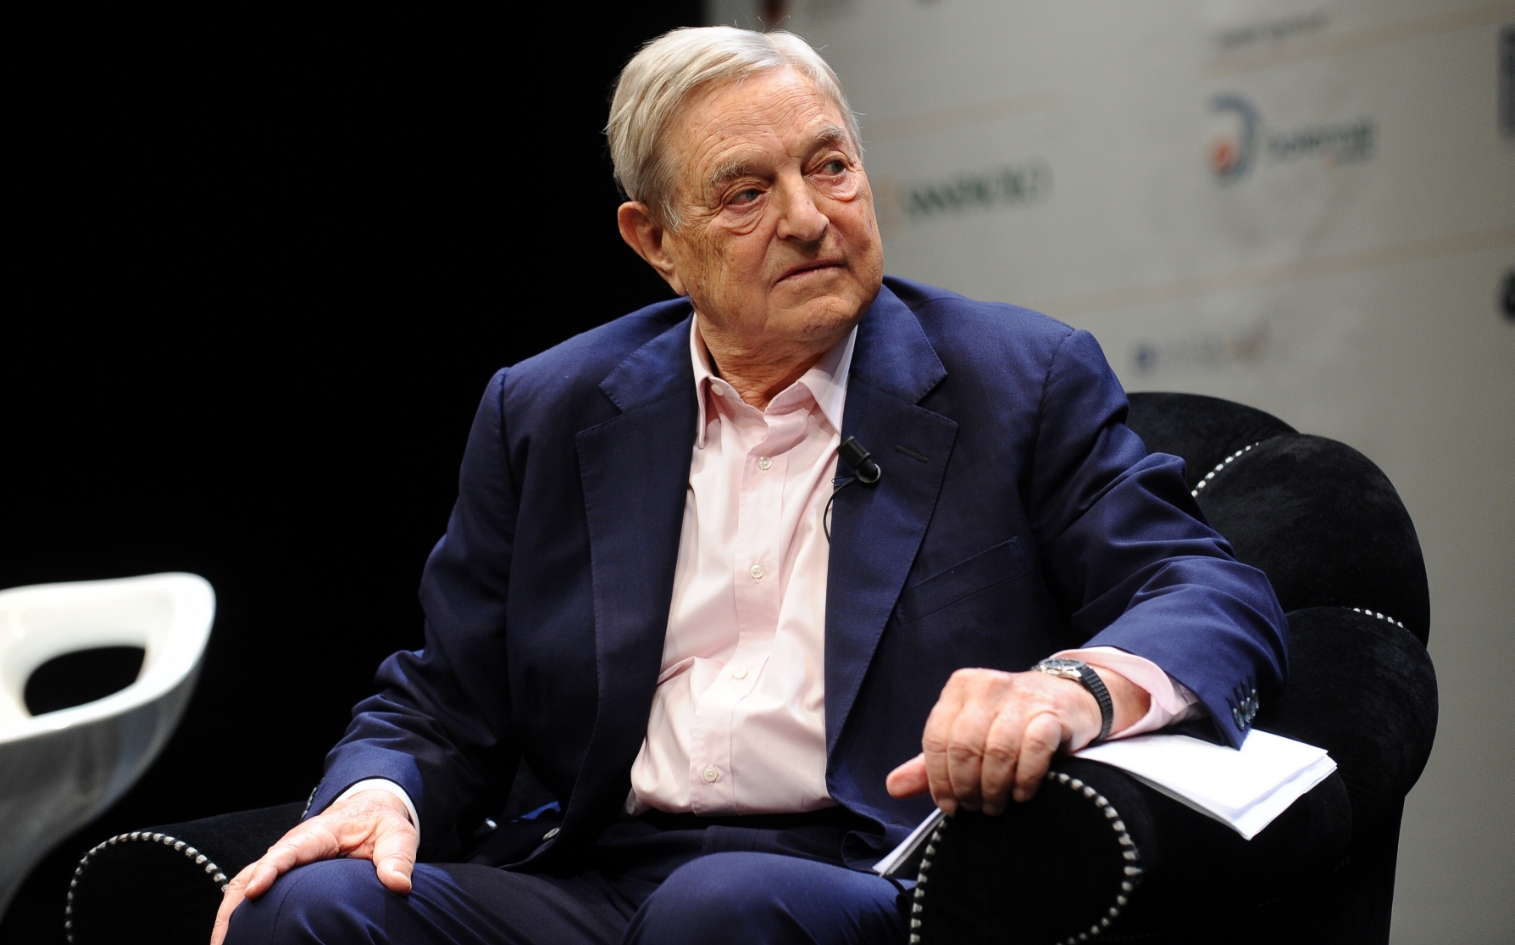 Image: How George Soros stole our election: A cautionary tale from an Albanian patriot